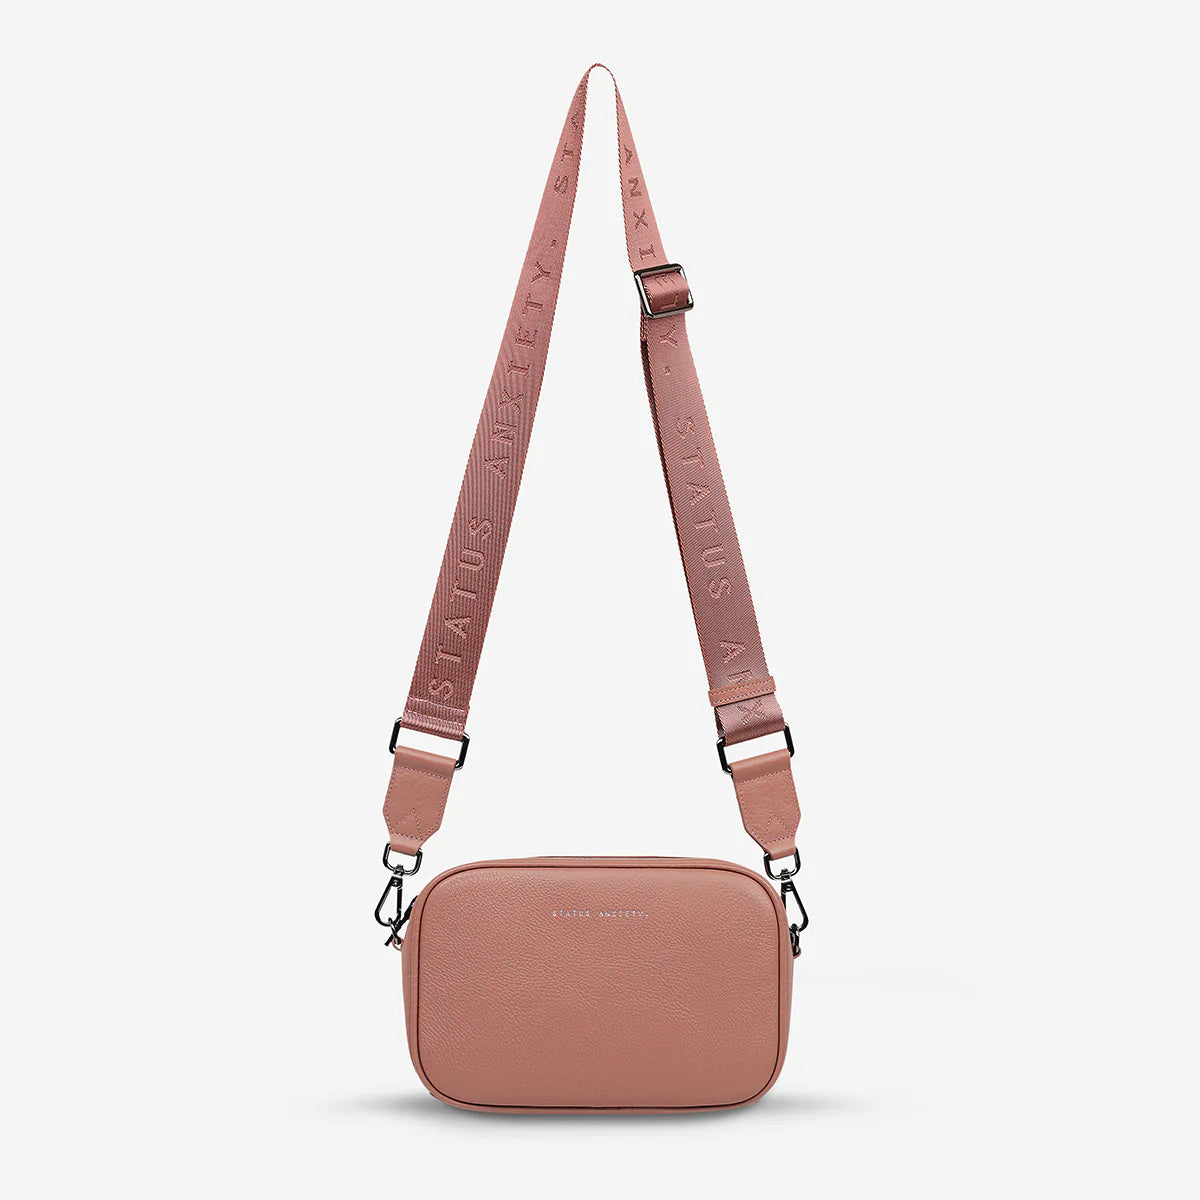 Plunder Leather Bag with Webbed Strap in Dusty Rose